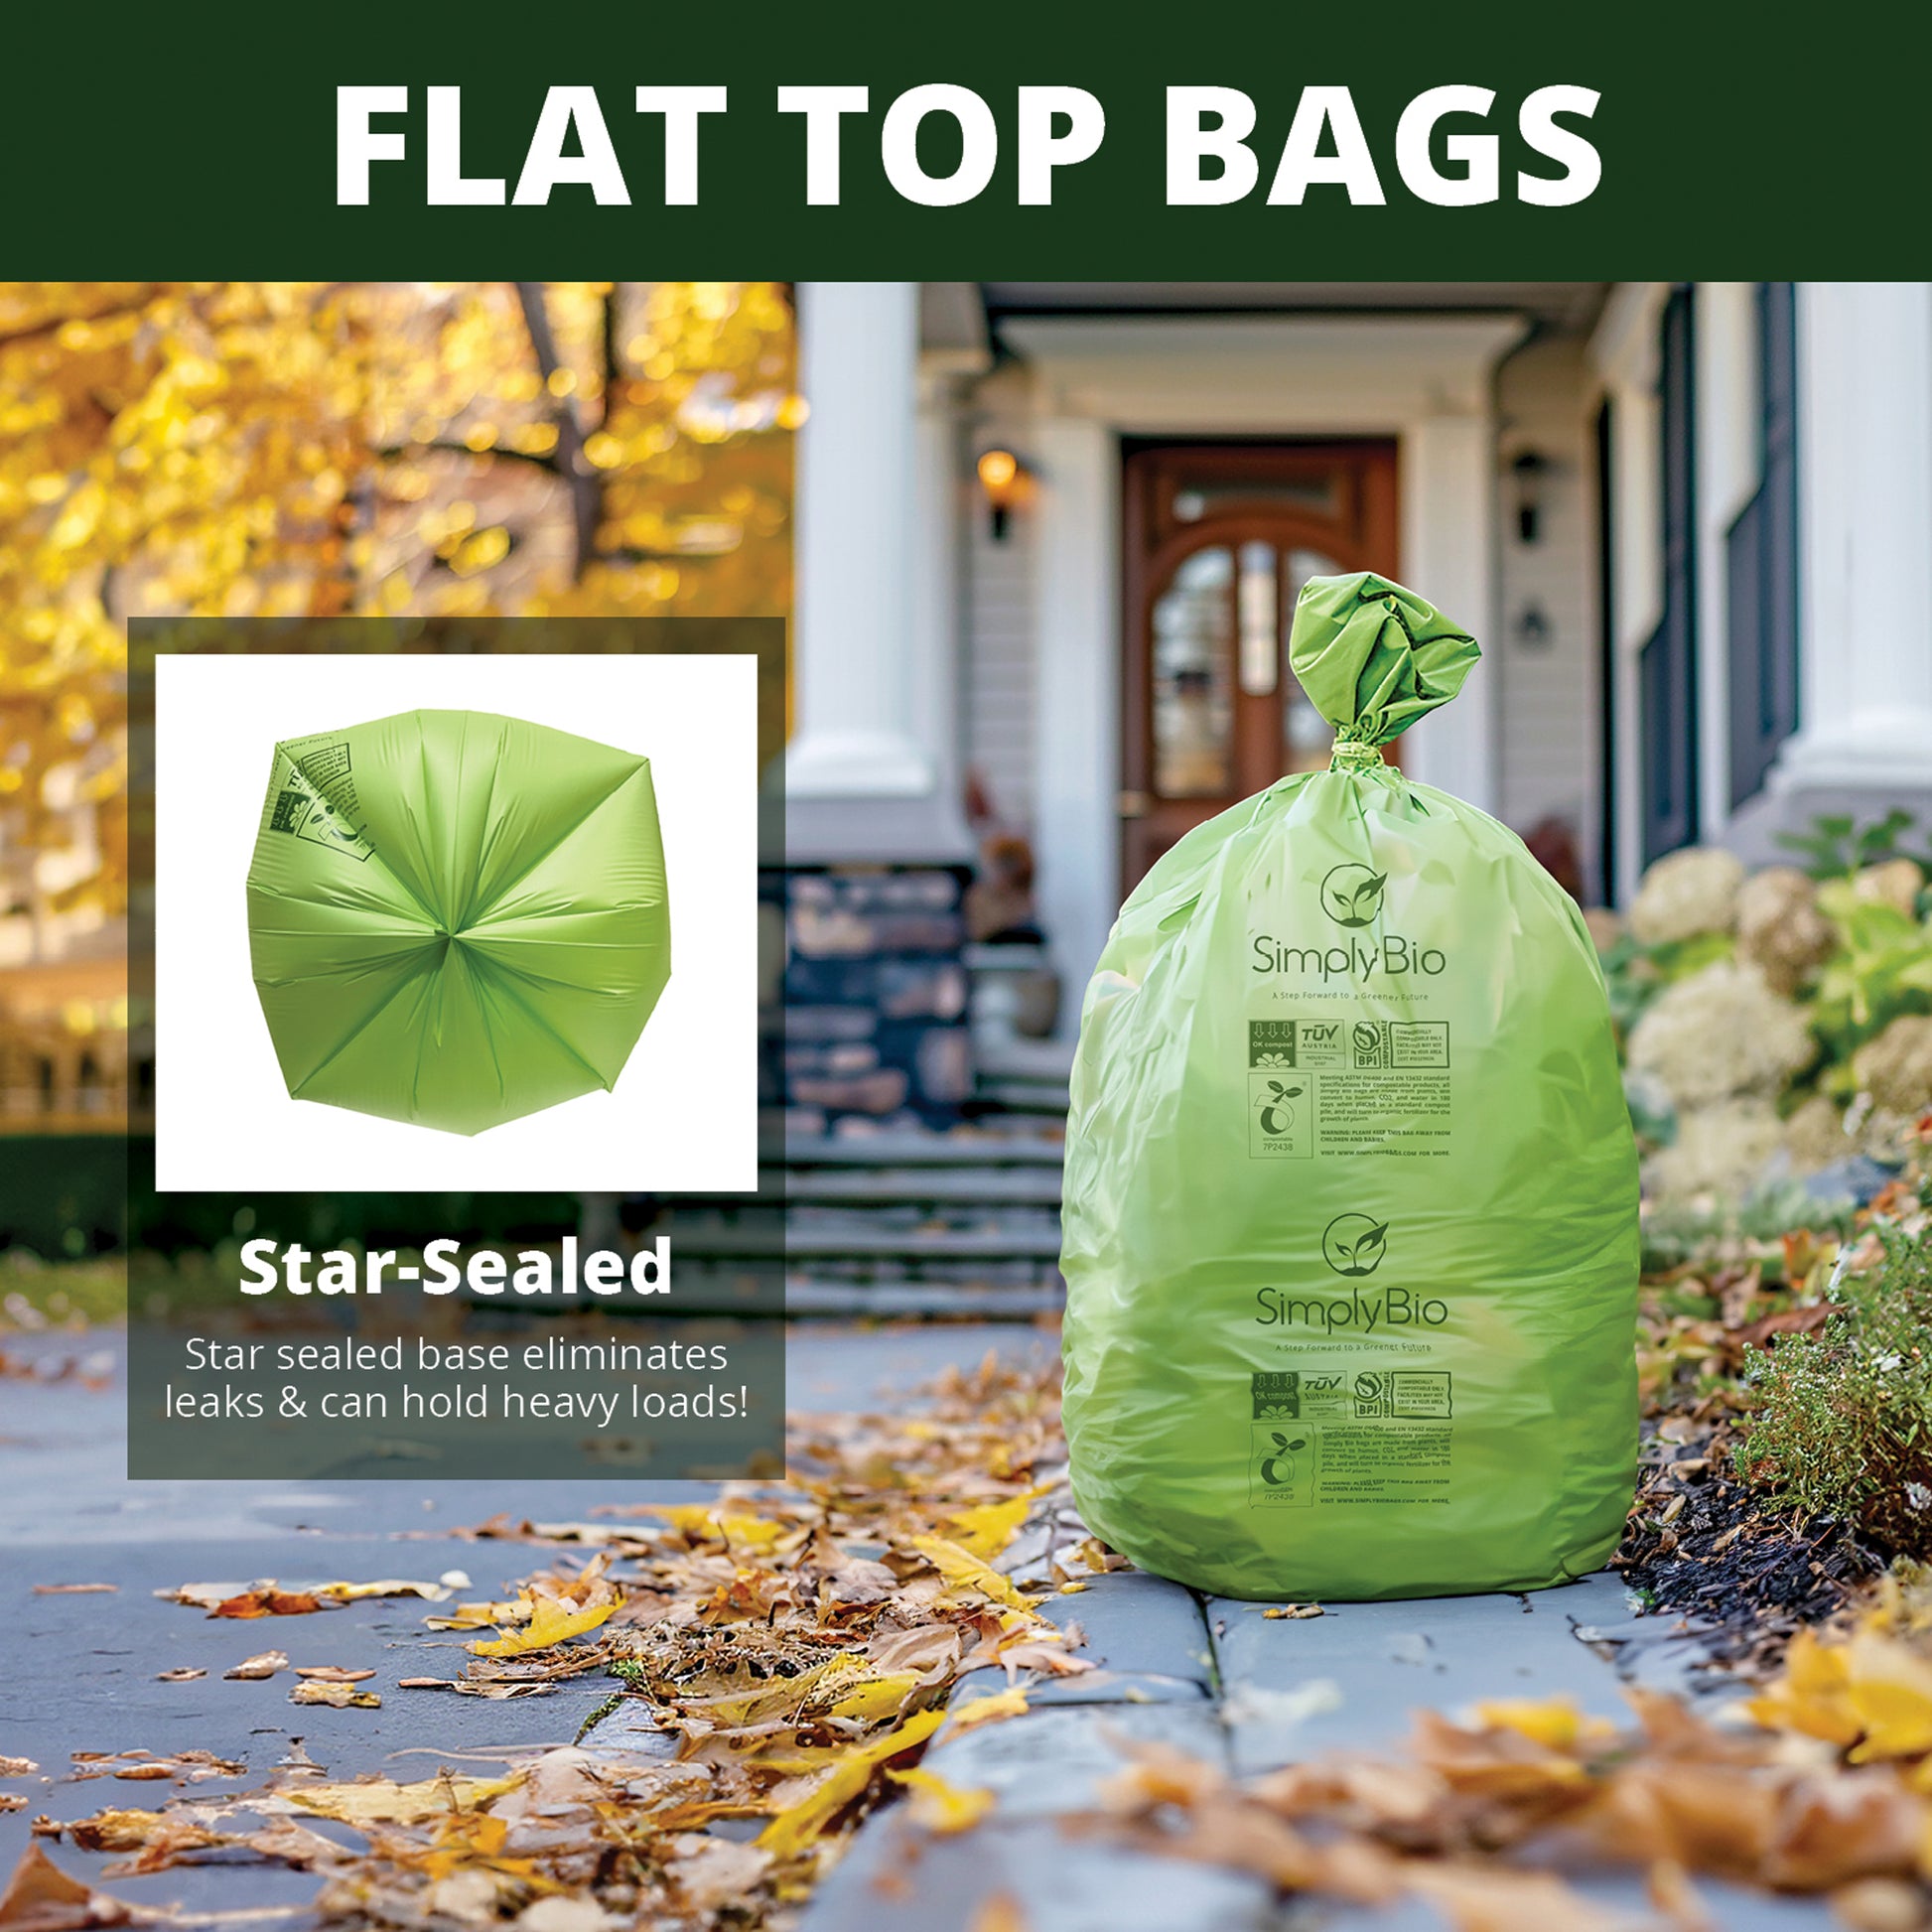 Simply Bio 55 gal. 1.57 Mil. Compostable Heavy-Duty Trash Bags with Flat Top, Eco-Friendly (12-Count), Green